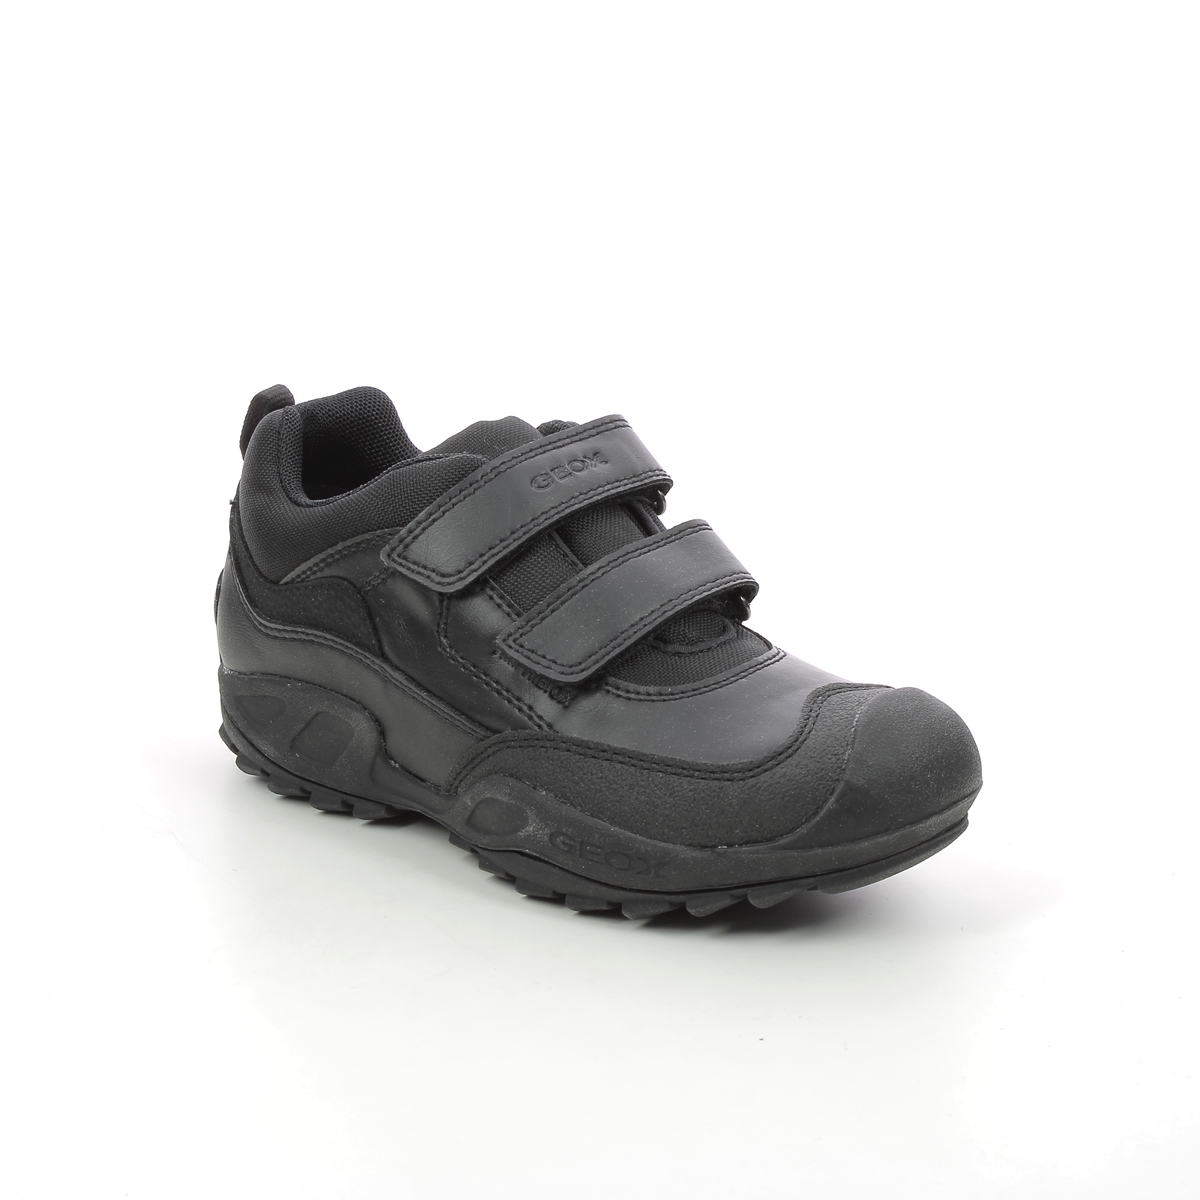 Geox - New Savage Tex (Black) J841Wb-C9999 In Size 37 In Plain Black For School For kids